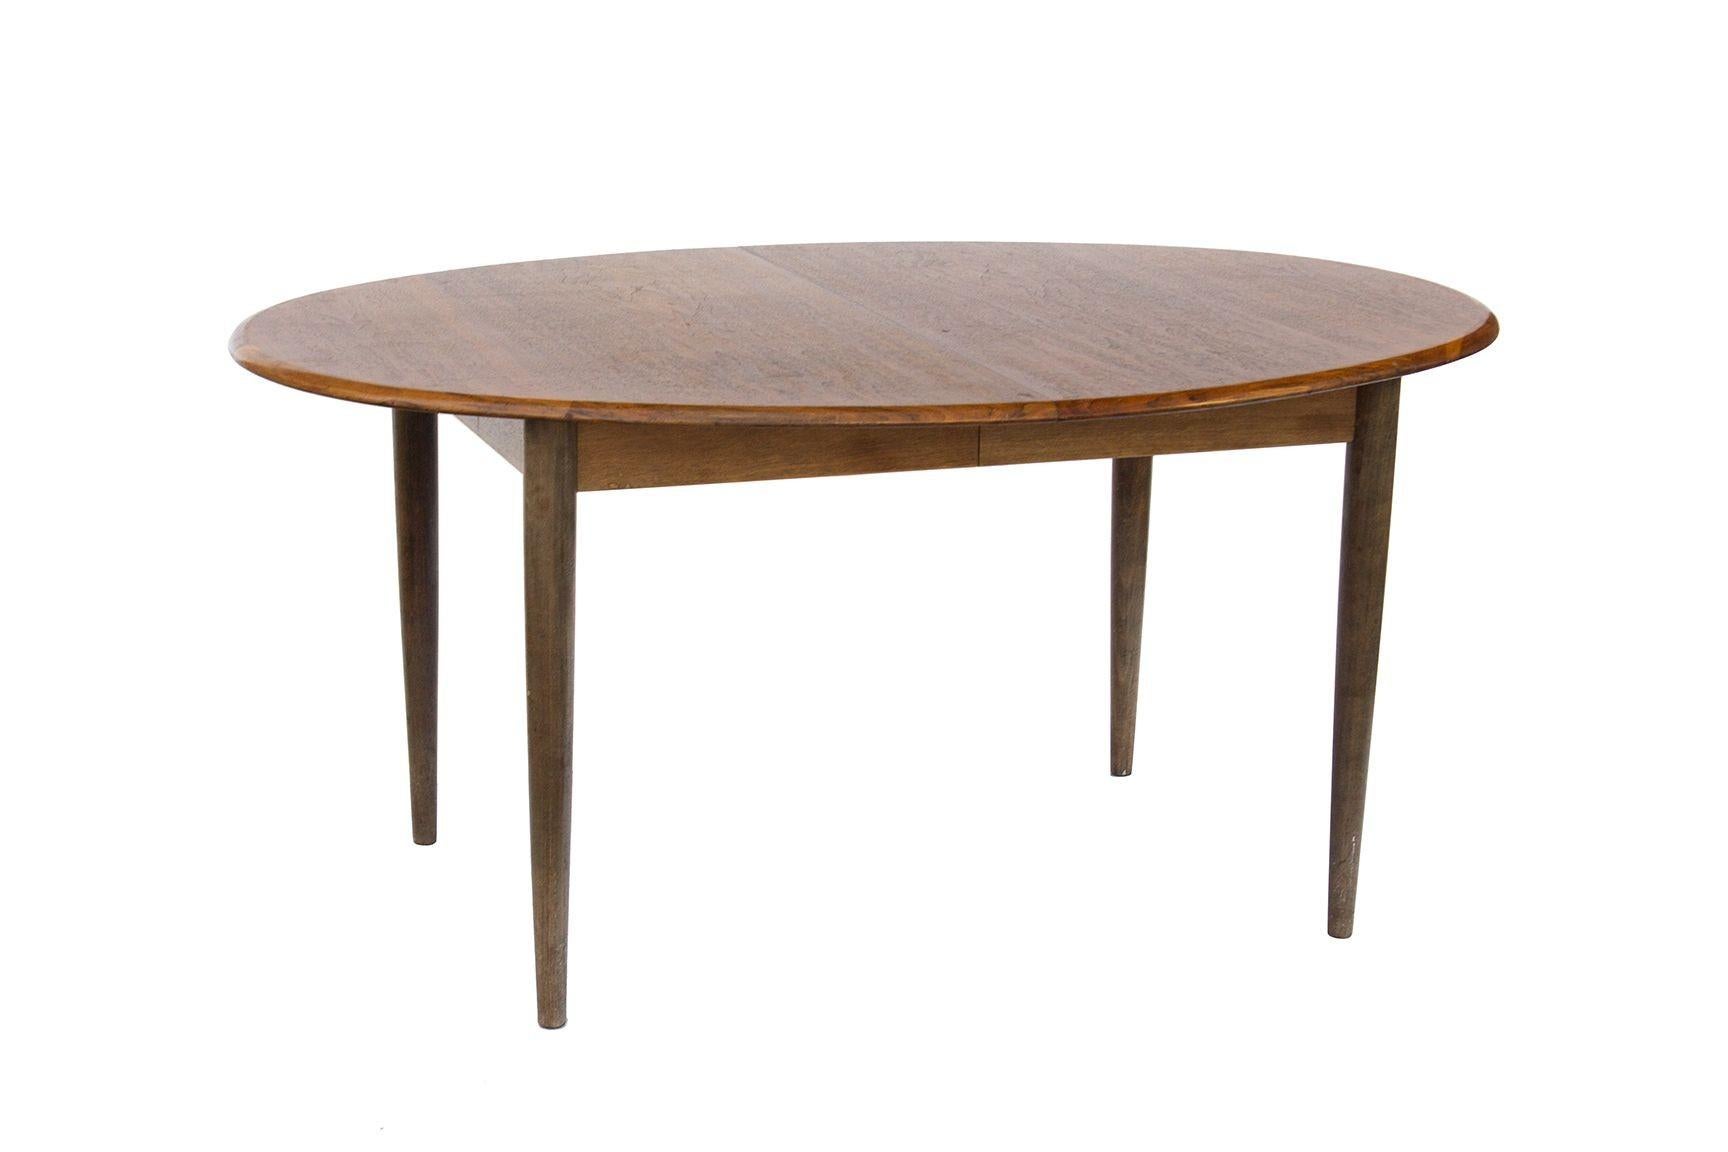 Denmark, 1960s
Danish teak dining table with two leaves by Gudme Mobelfabrik. Made in Denmark. This is a nice shape and size but has some decently heavy wear. The perimeter is in solid teak. 
CONDITION NOTES: General wear to the finish, including